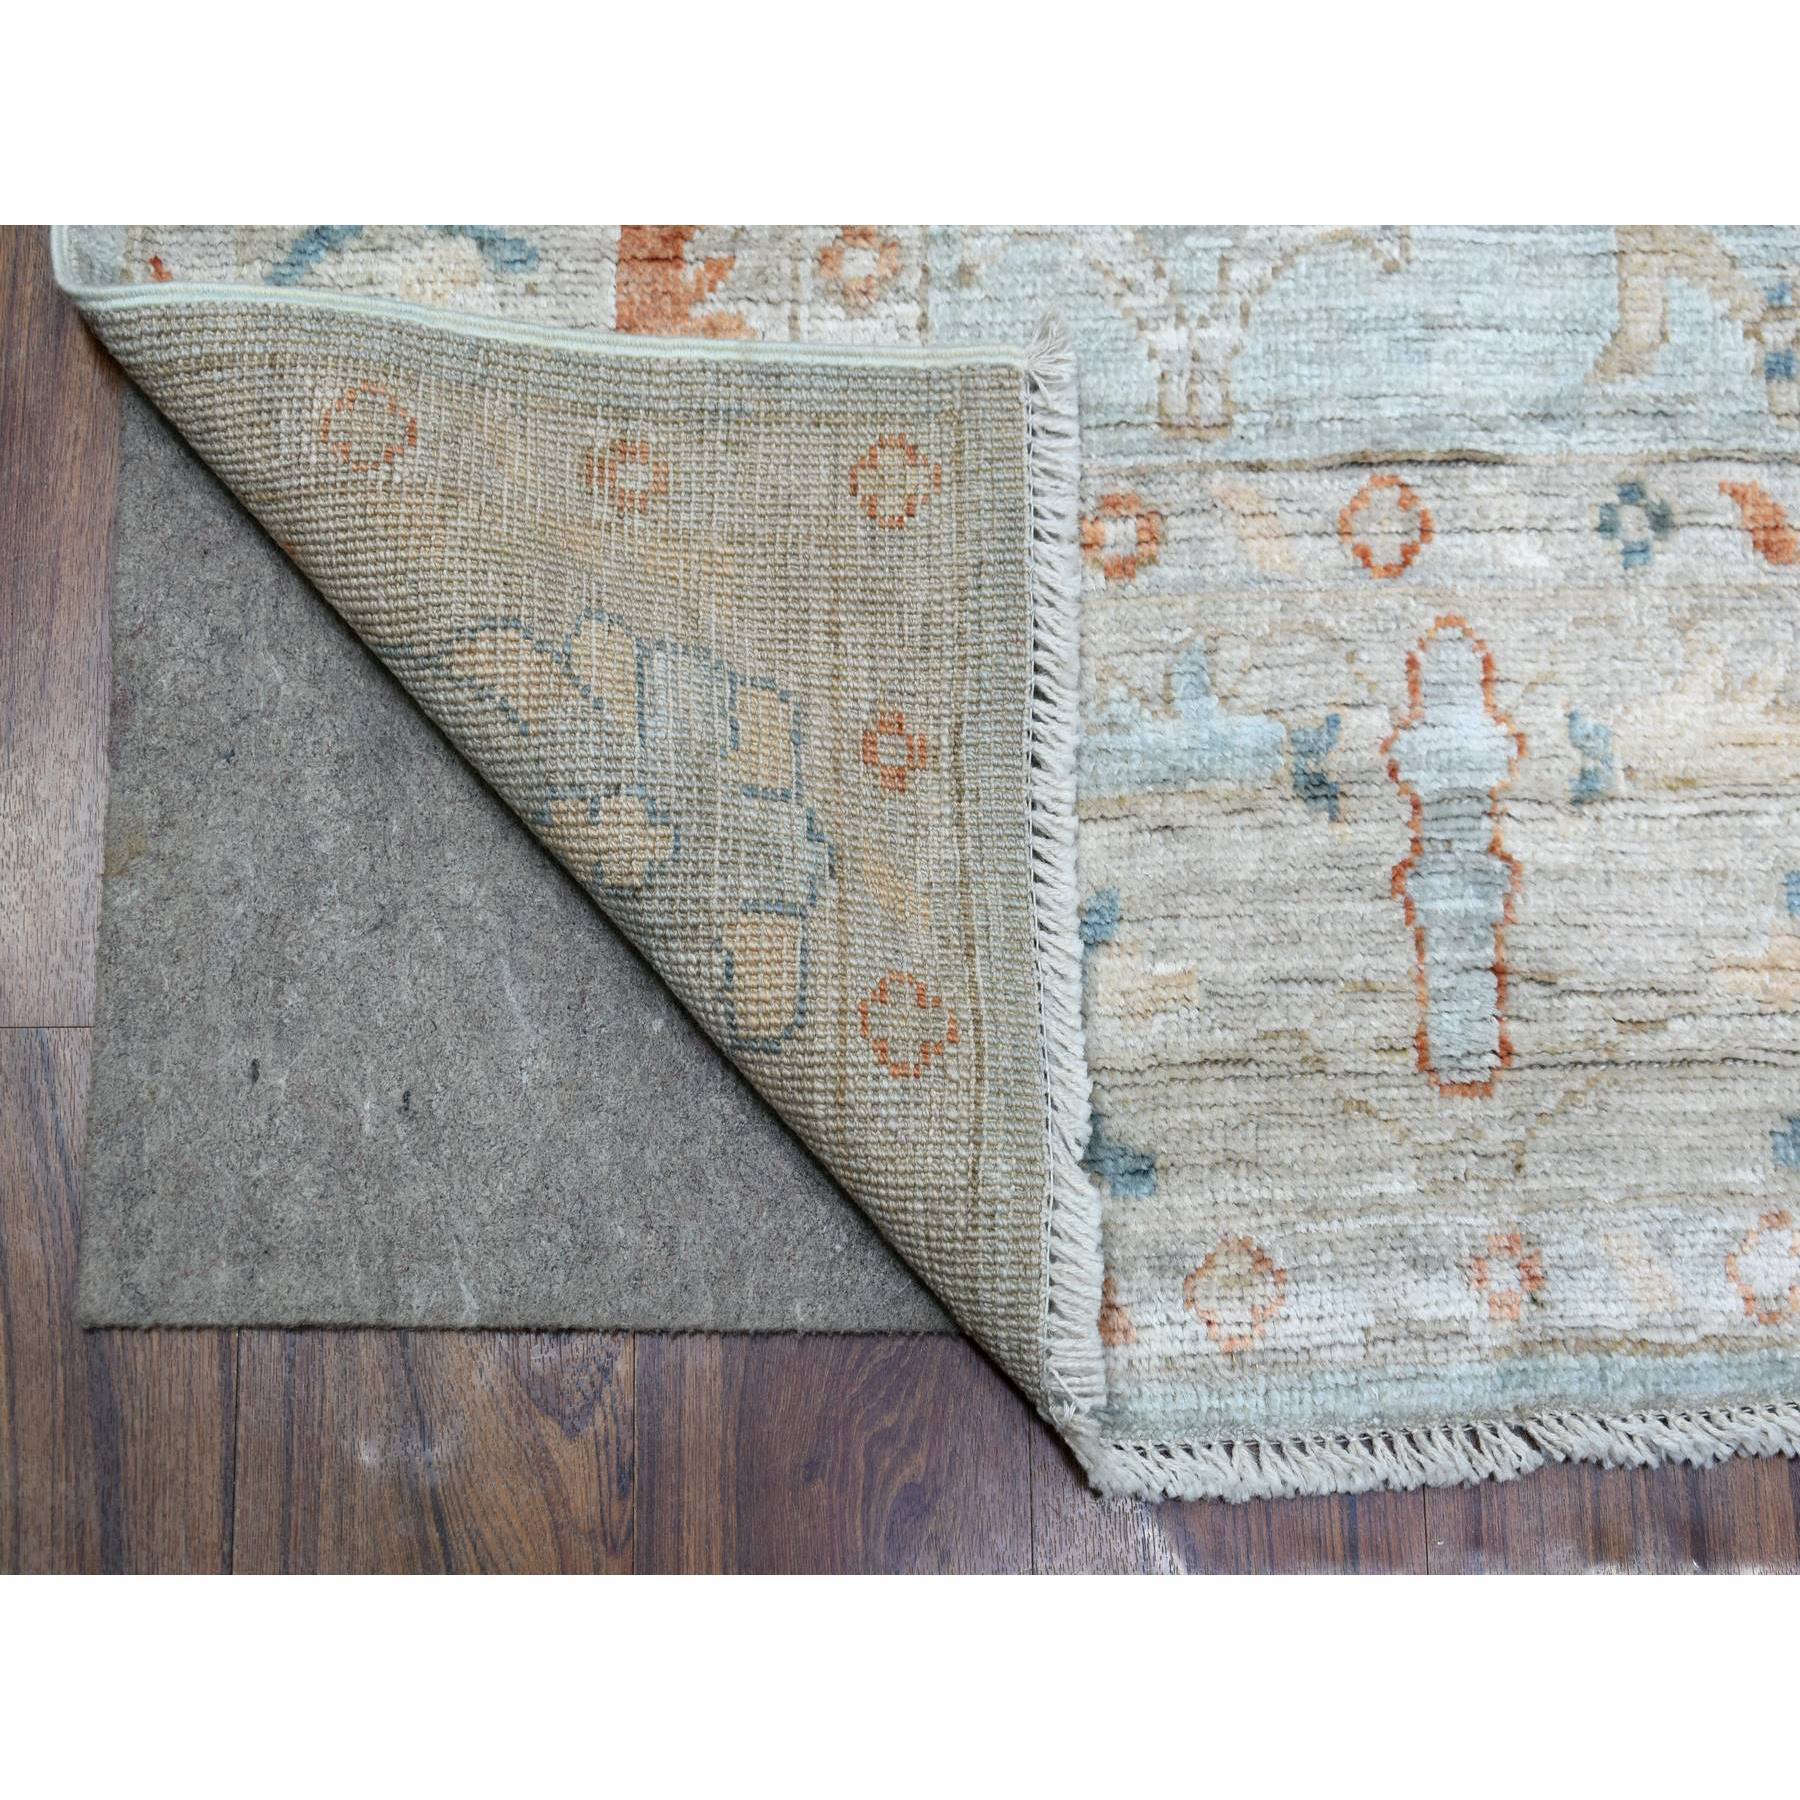 6'1"x8'7" Hand Woven Gray Afghan Angora Oushak with Assortment of Colors Soft and Pliable Wool Oriental Rug 